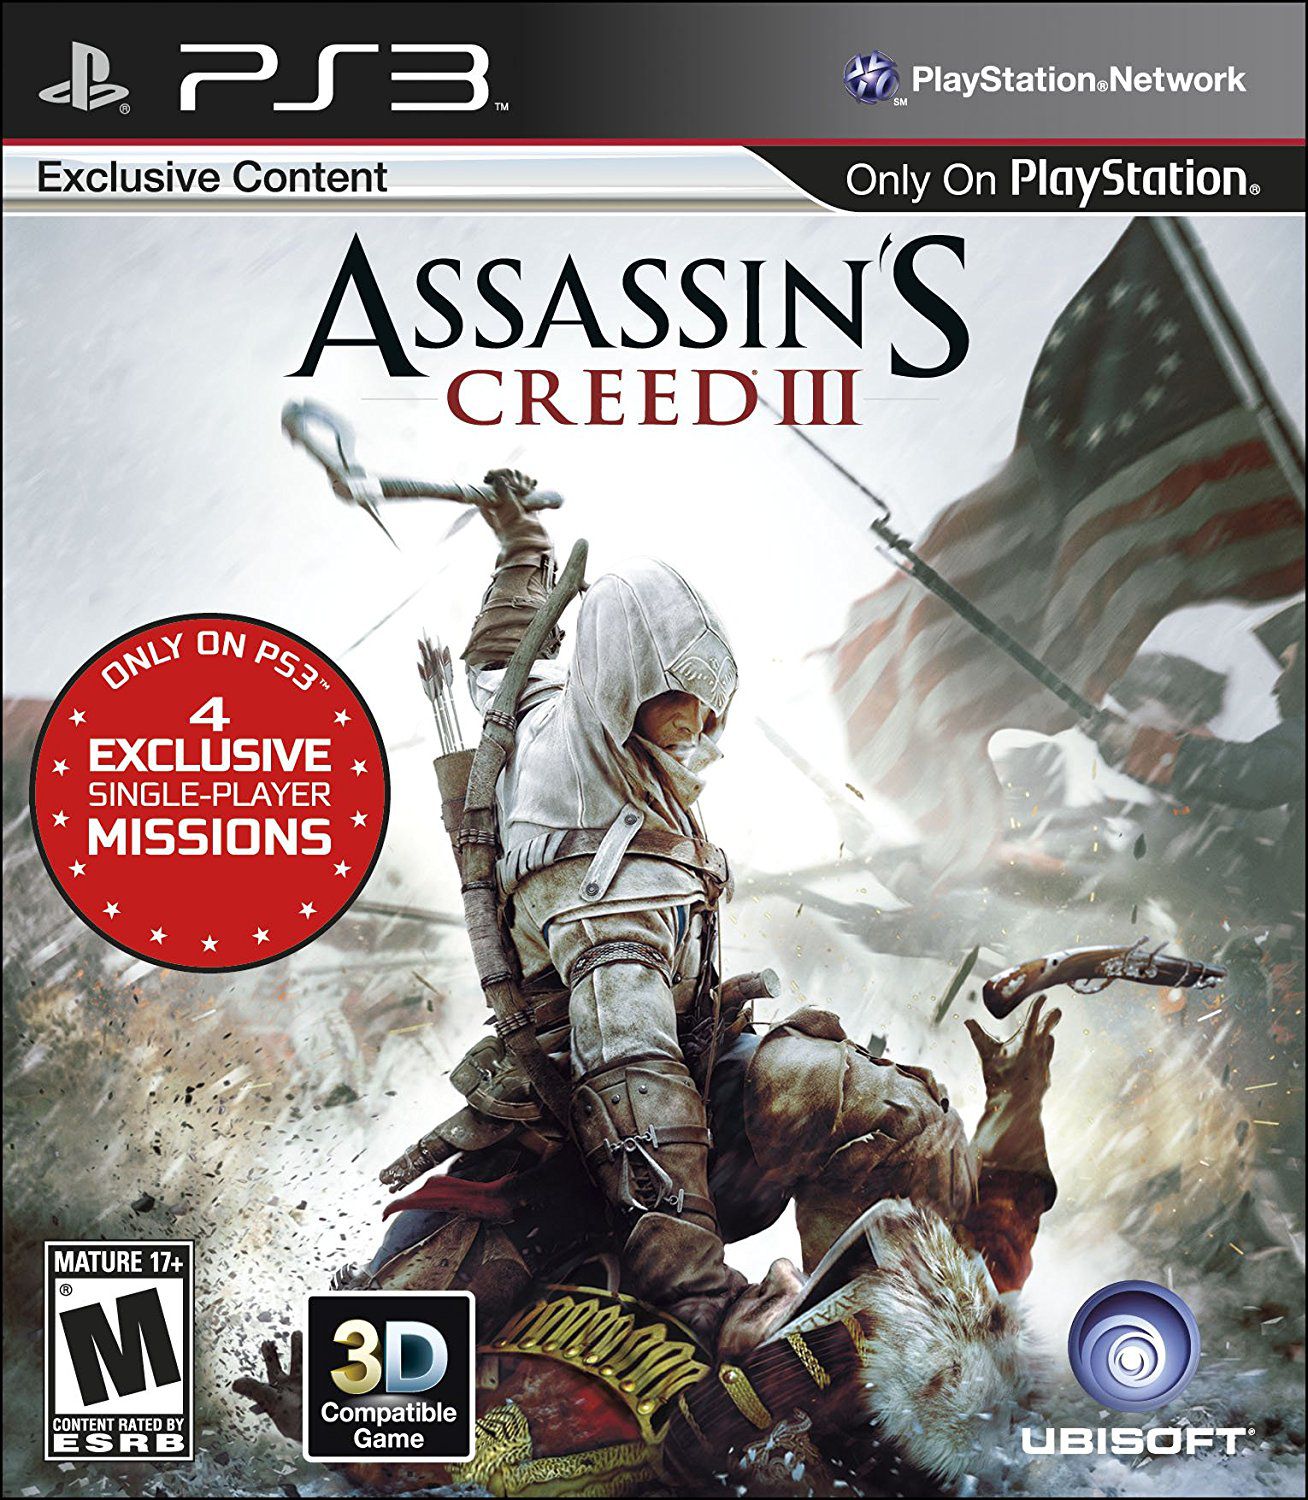 Assassin's Creed Rogue - Xbox 360 / Xbox One - Game Games - Loja de Games  Online